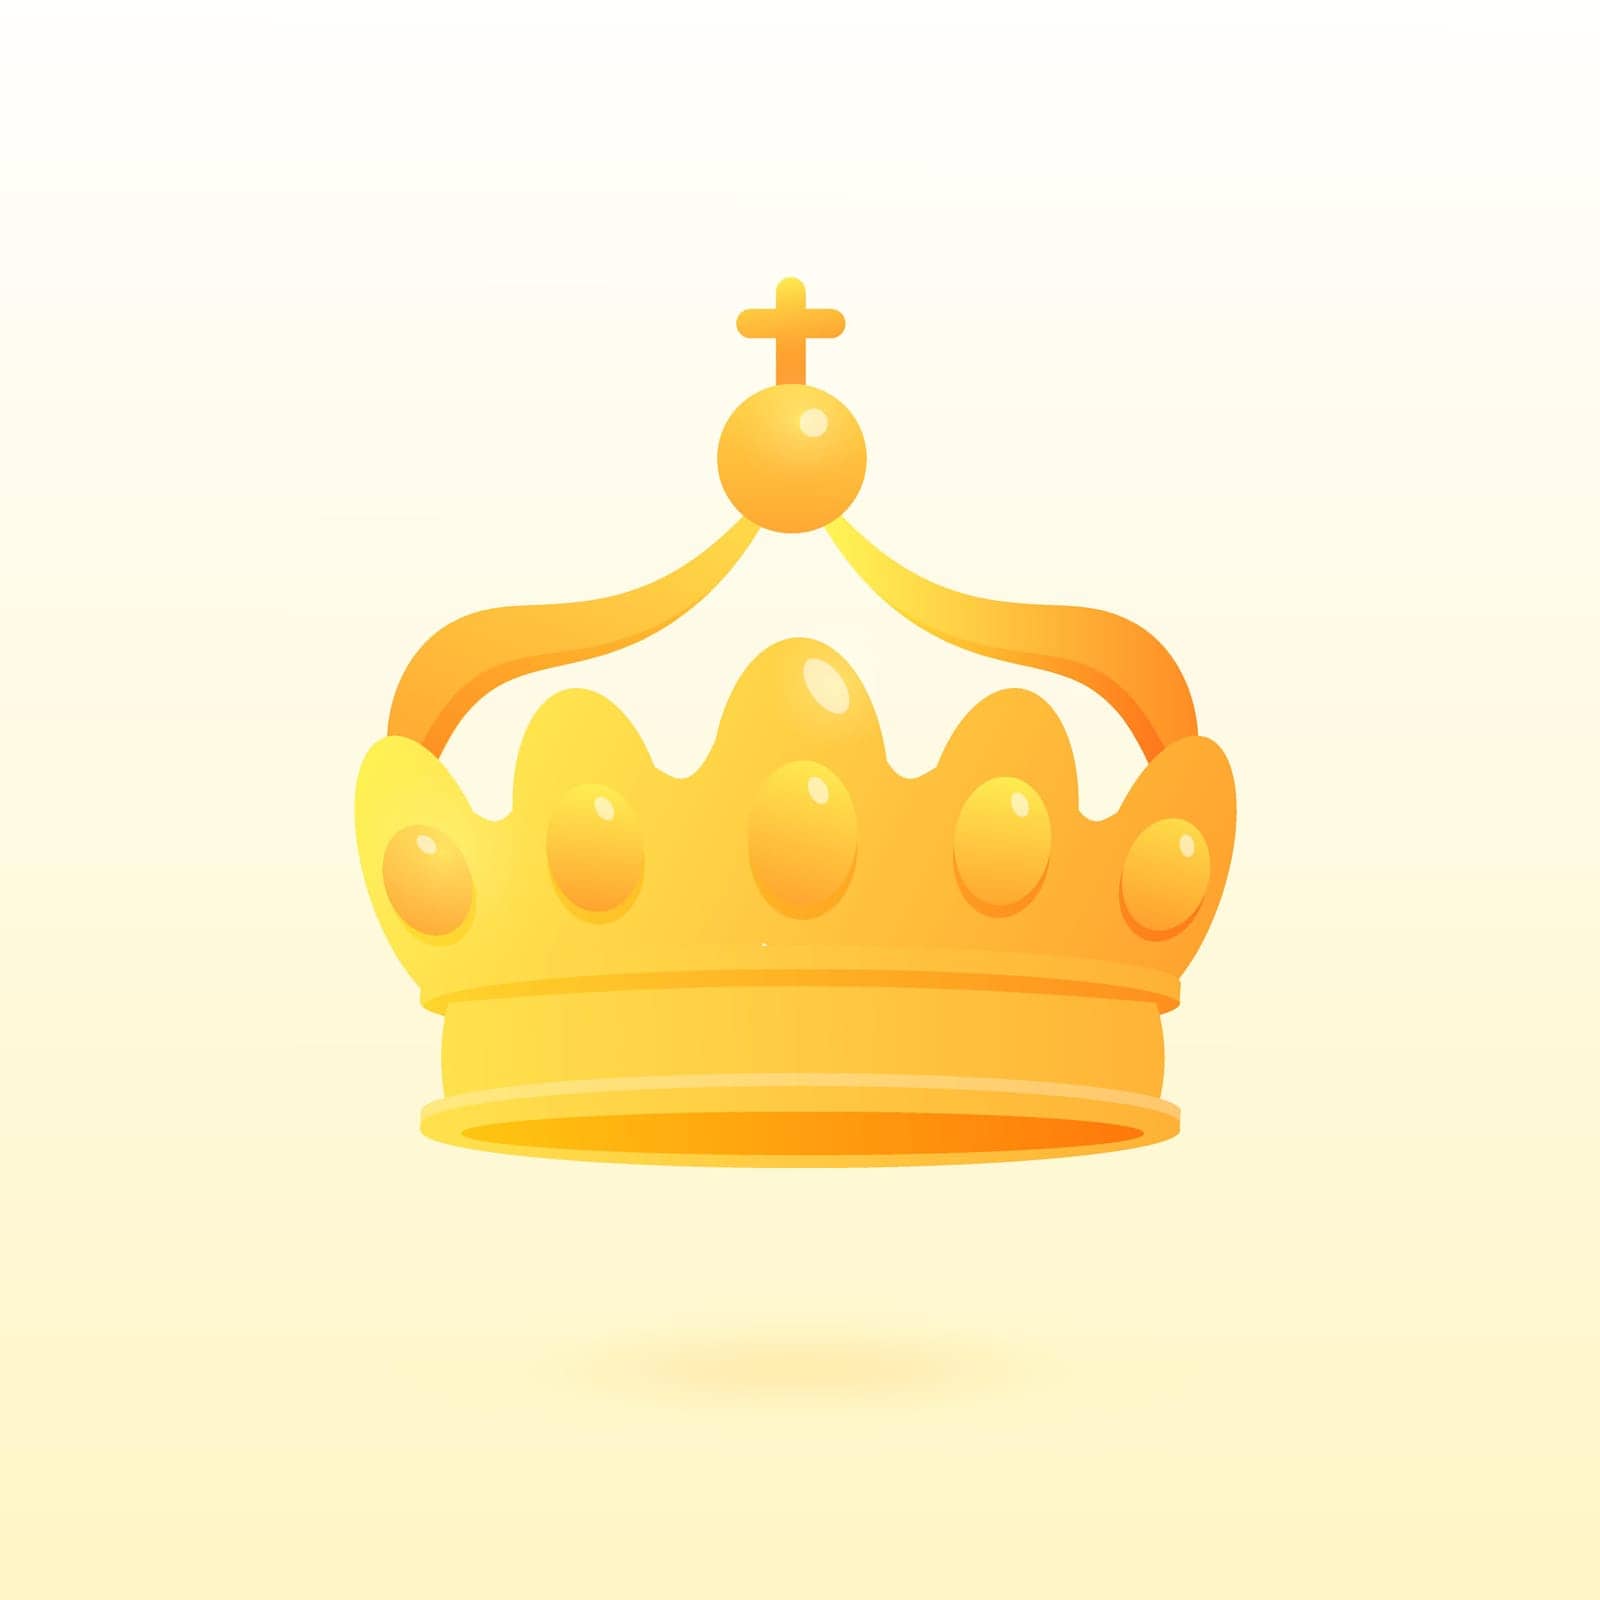 Crown golden game vector Award icon for leader or winner King or monarch, queen or princess tiara, prince headdress 3D Classic heraldic imperial sign. Vintage or old jewelry, monarchy theme